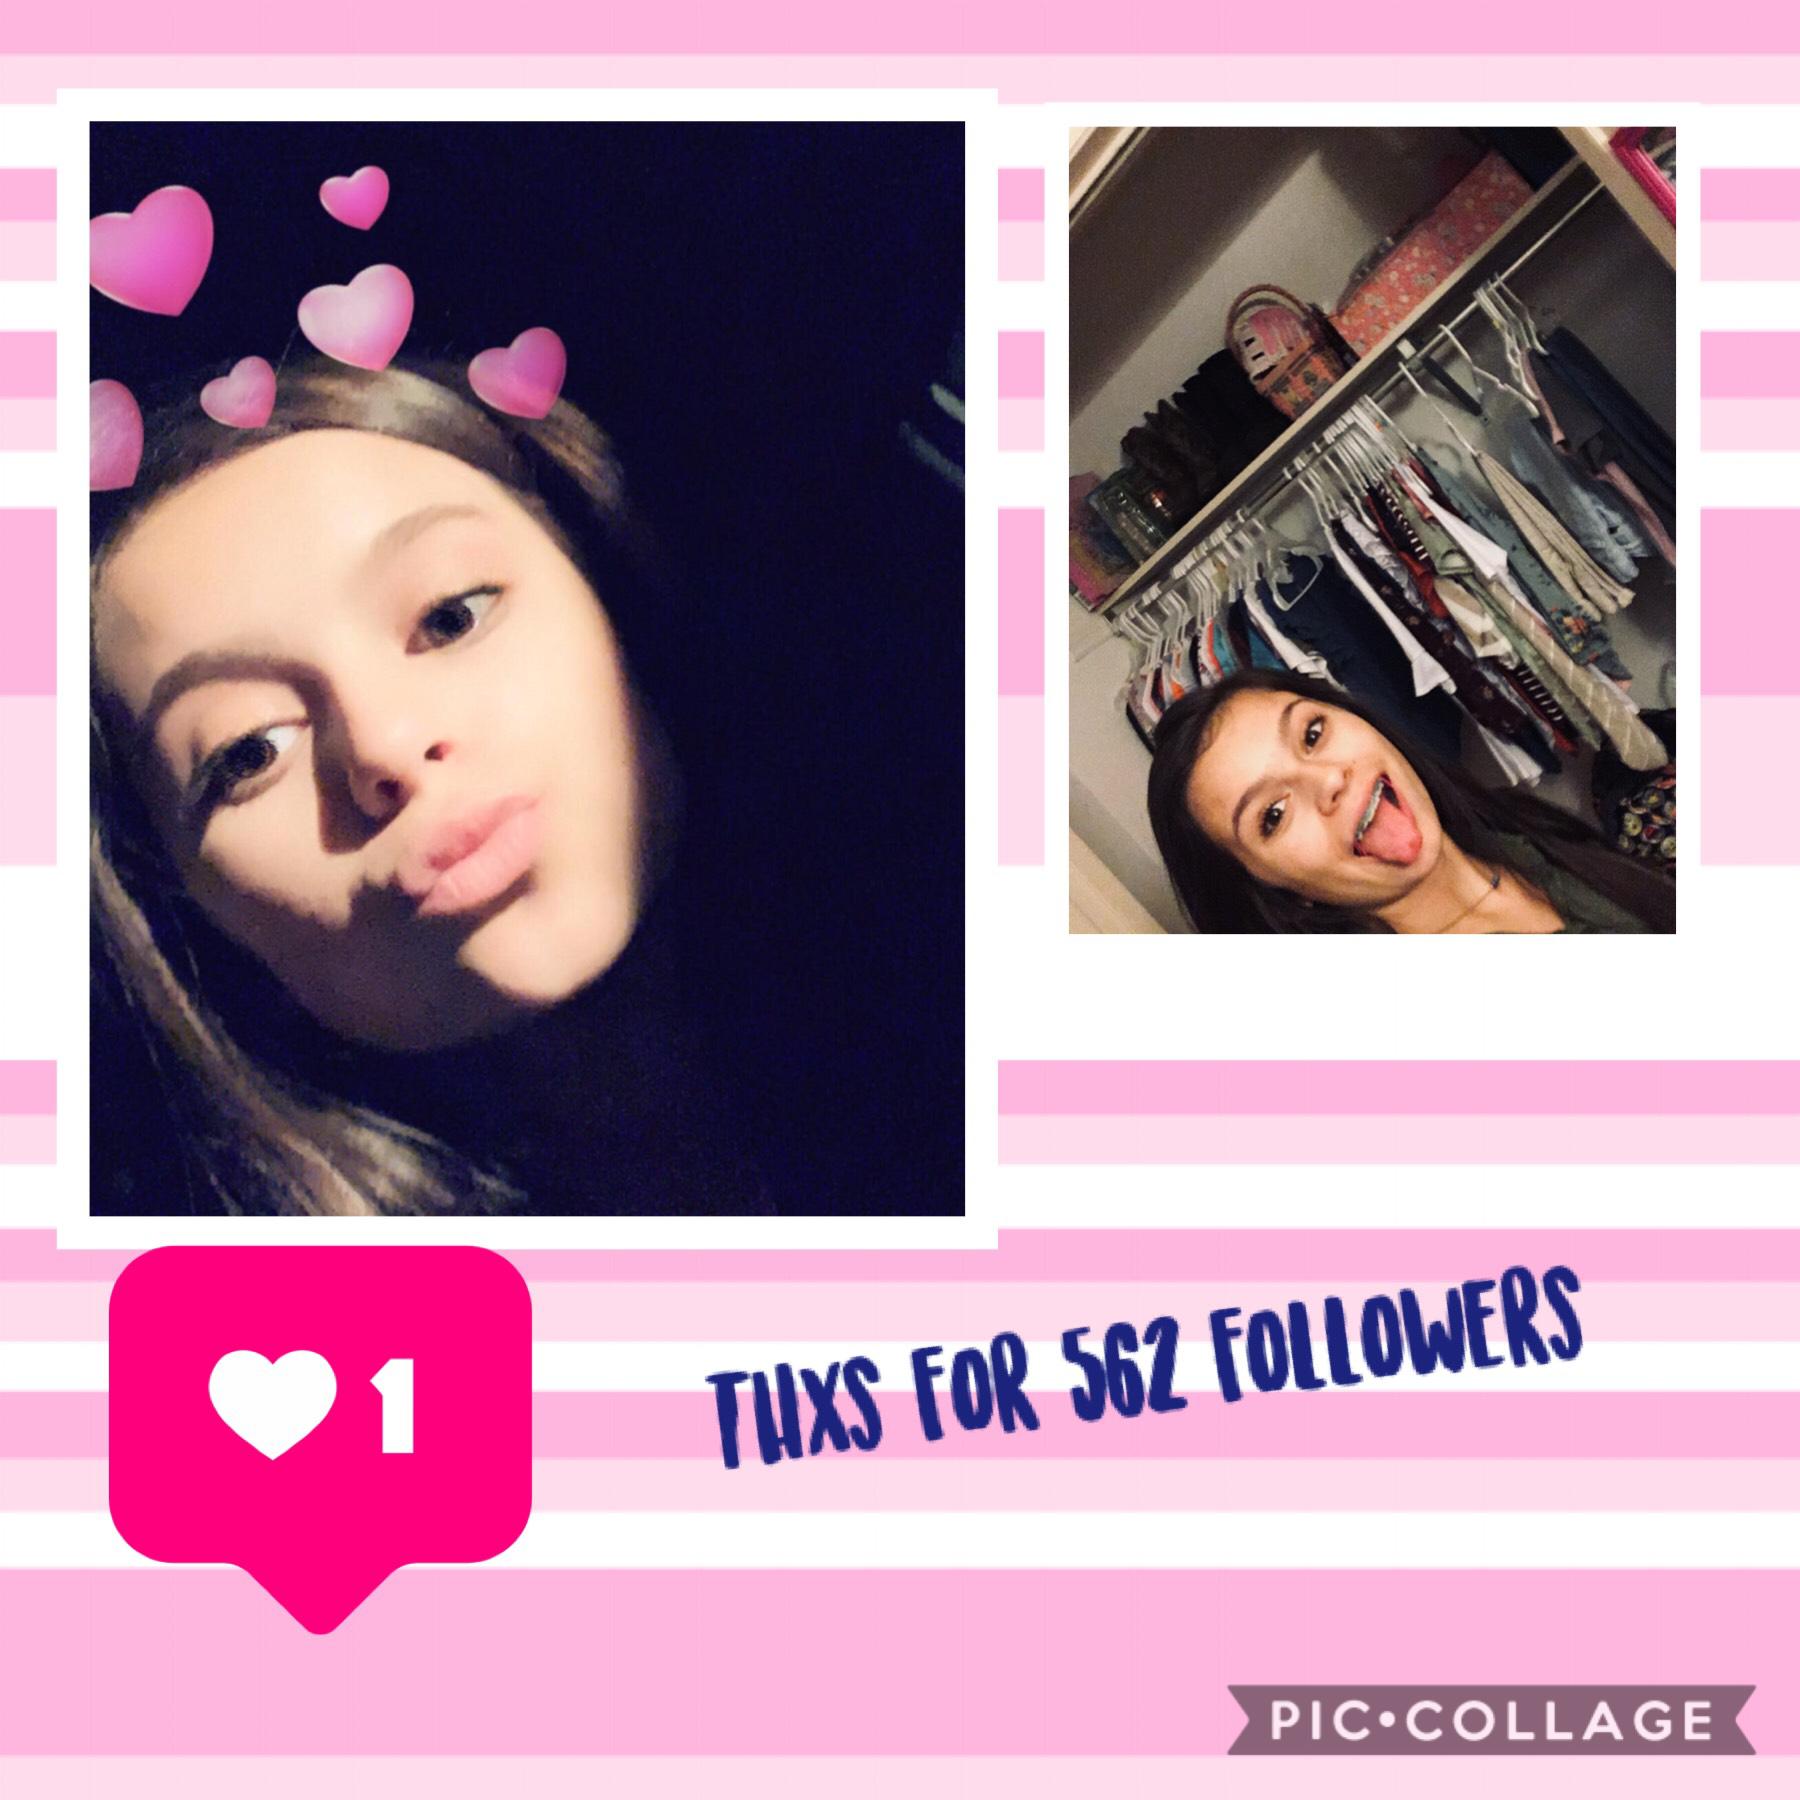 Thank you for all the support y’all have given me I will go like ur pics!! Btw I will be entering high school this year so y’all wish me good luck!! 👍🏽 y’all are my PicCollage family❤️❤️